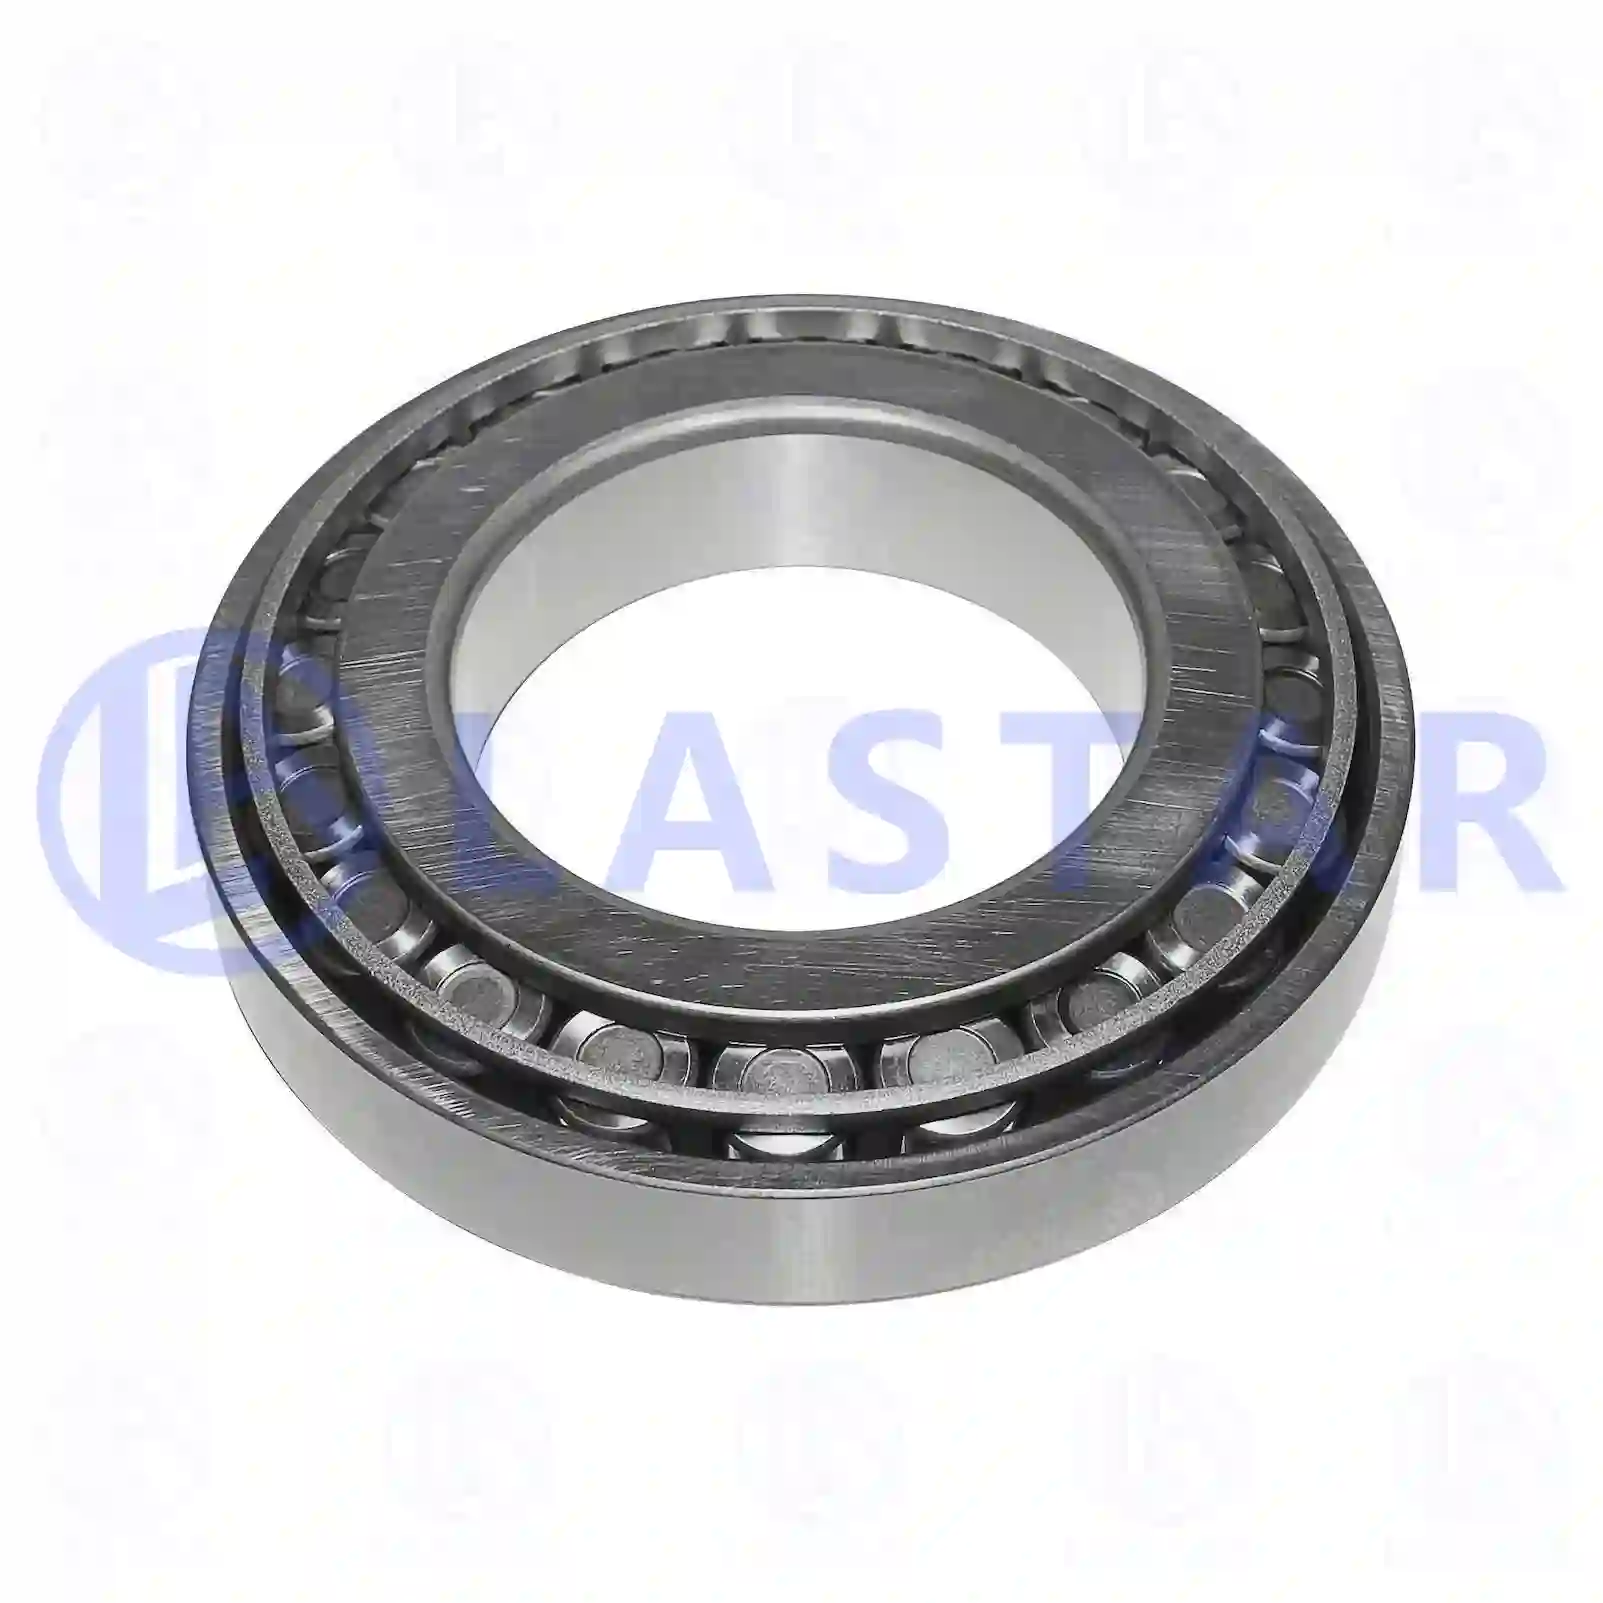 Bearings Tapered roller bearing, la no: 77725209 ,  oem no:06324805000, 06324850095, 06324890032, 06324890050, 06324890095, 64934200023, 64934200024, 64934200065, 81934200090, A0023431220, 0007200302, 000720030220, 0049812105, 0049814905, 0079810005, 0023430220, 0023431220, 0959130220 Lastar Spare Part | Truck Spare Parts, Auotomotive Spare Parts